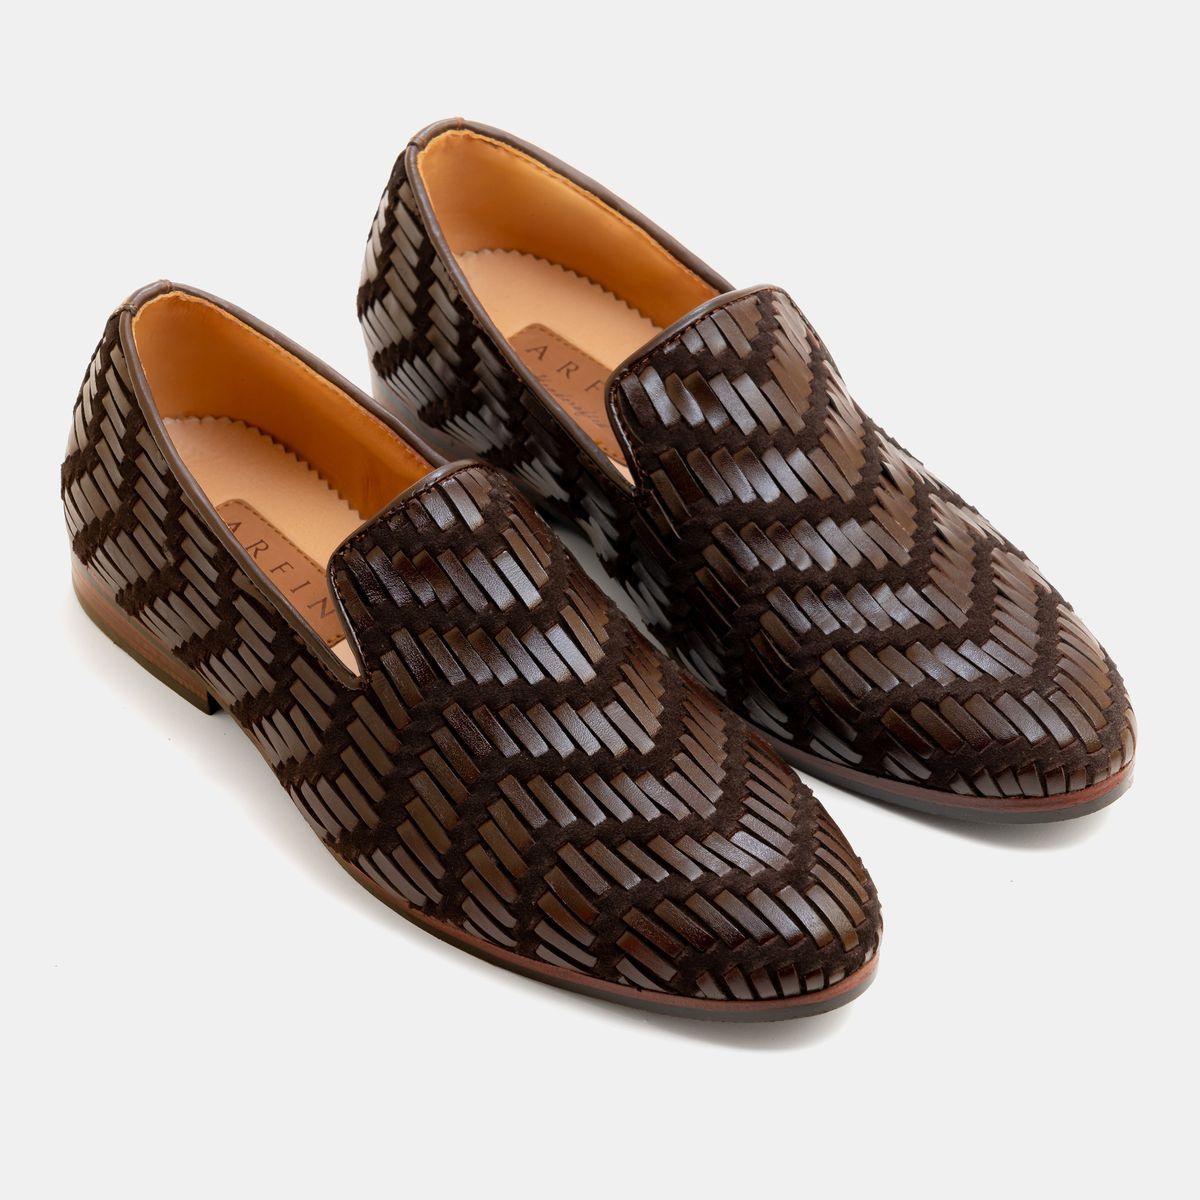 Stripe Braided & Suede Loafer Image